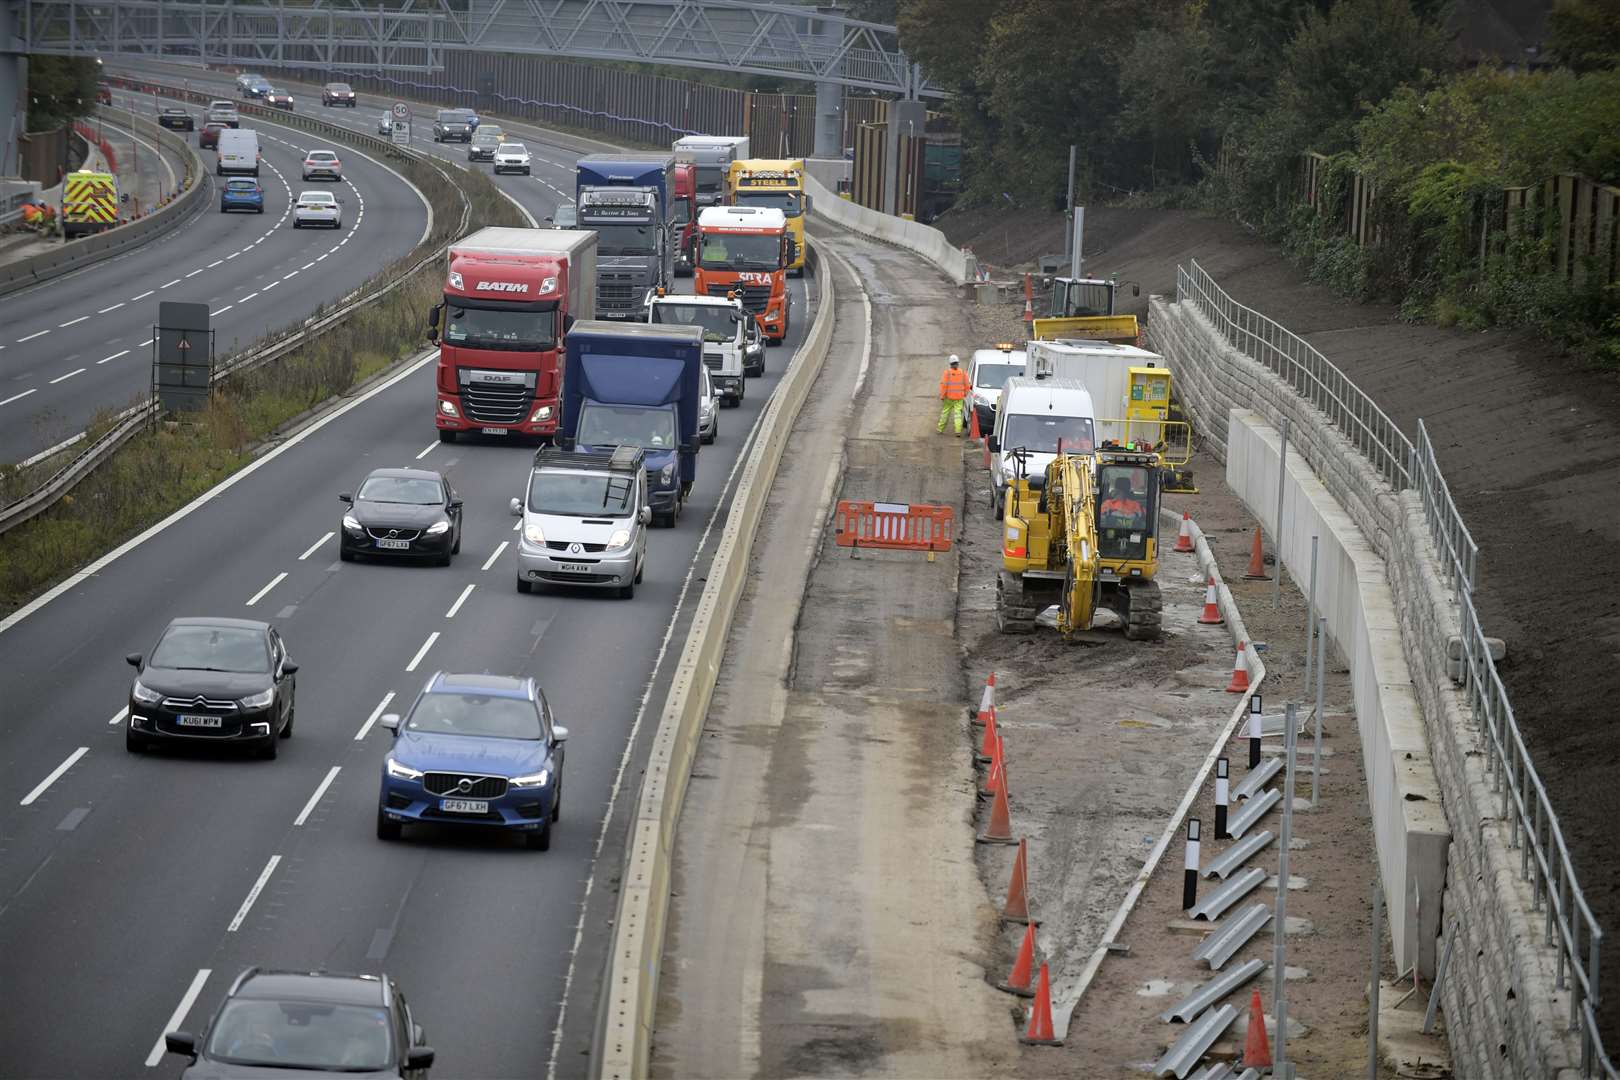 The motorway was closed between junction 4 and 6 overnight